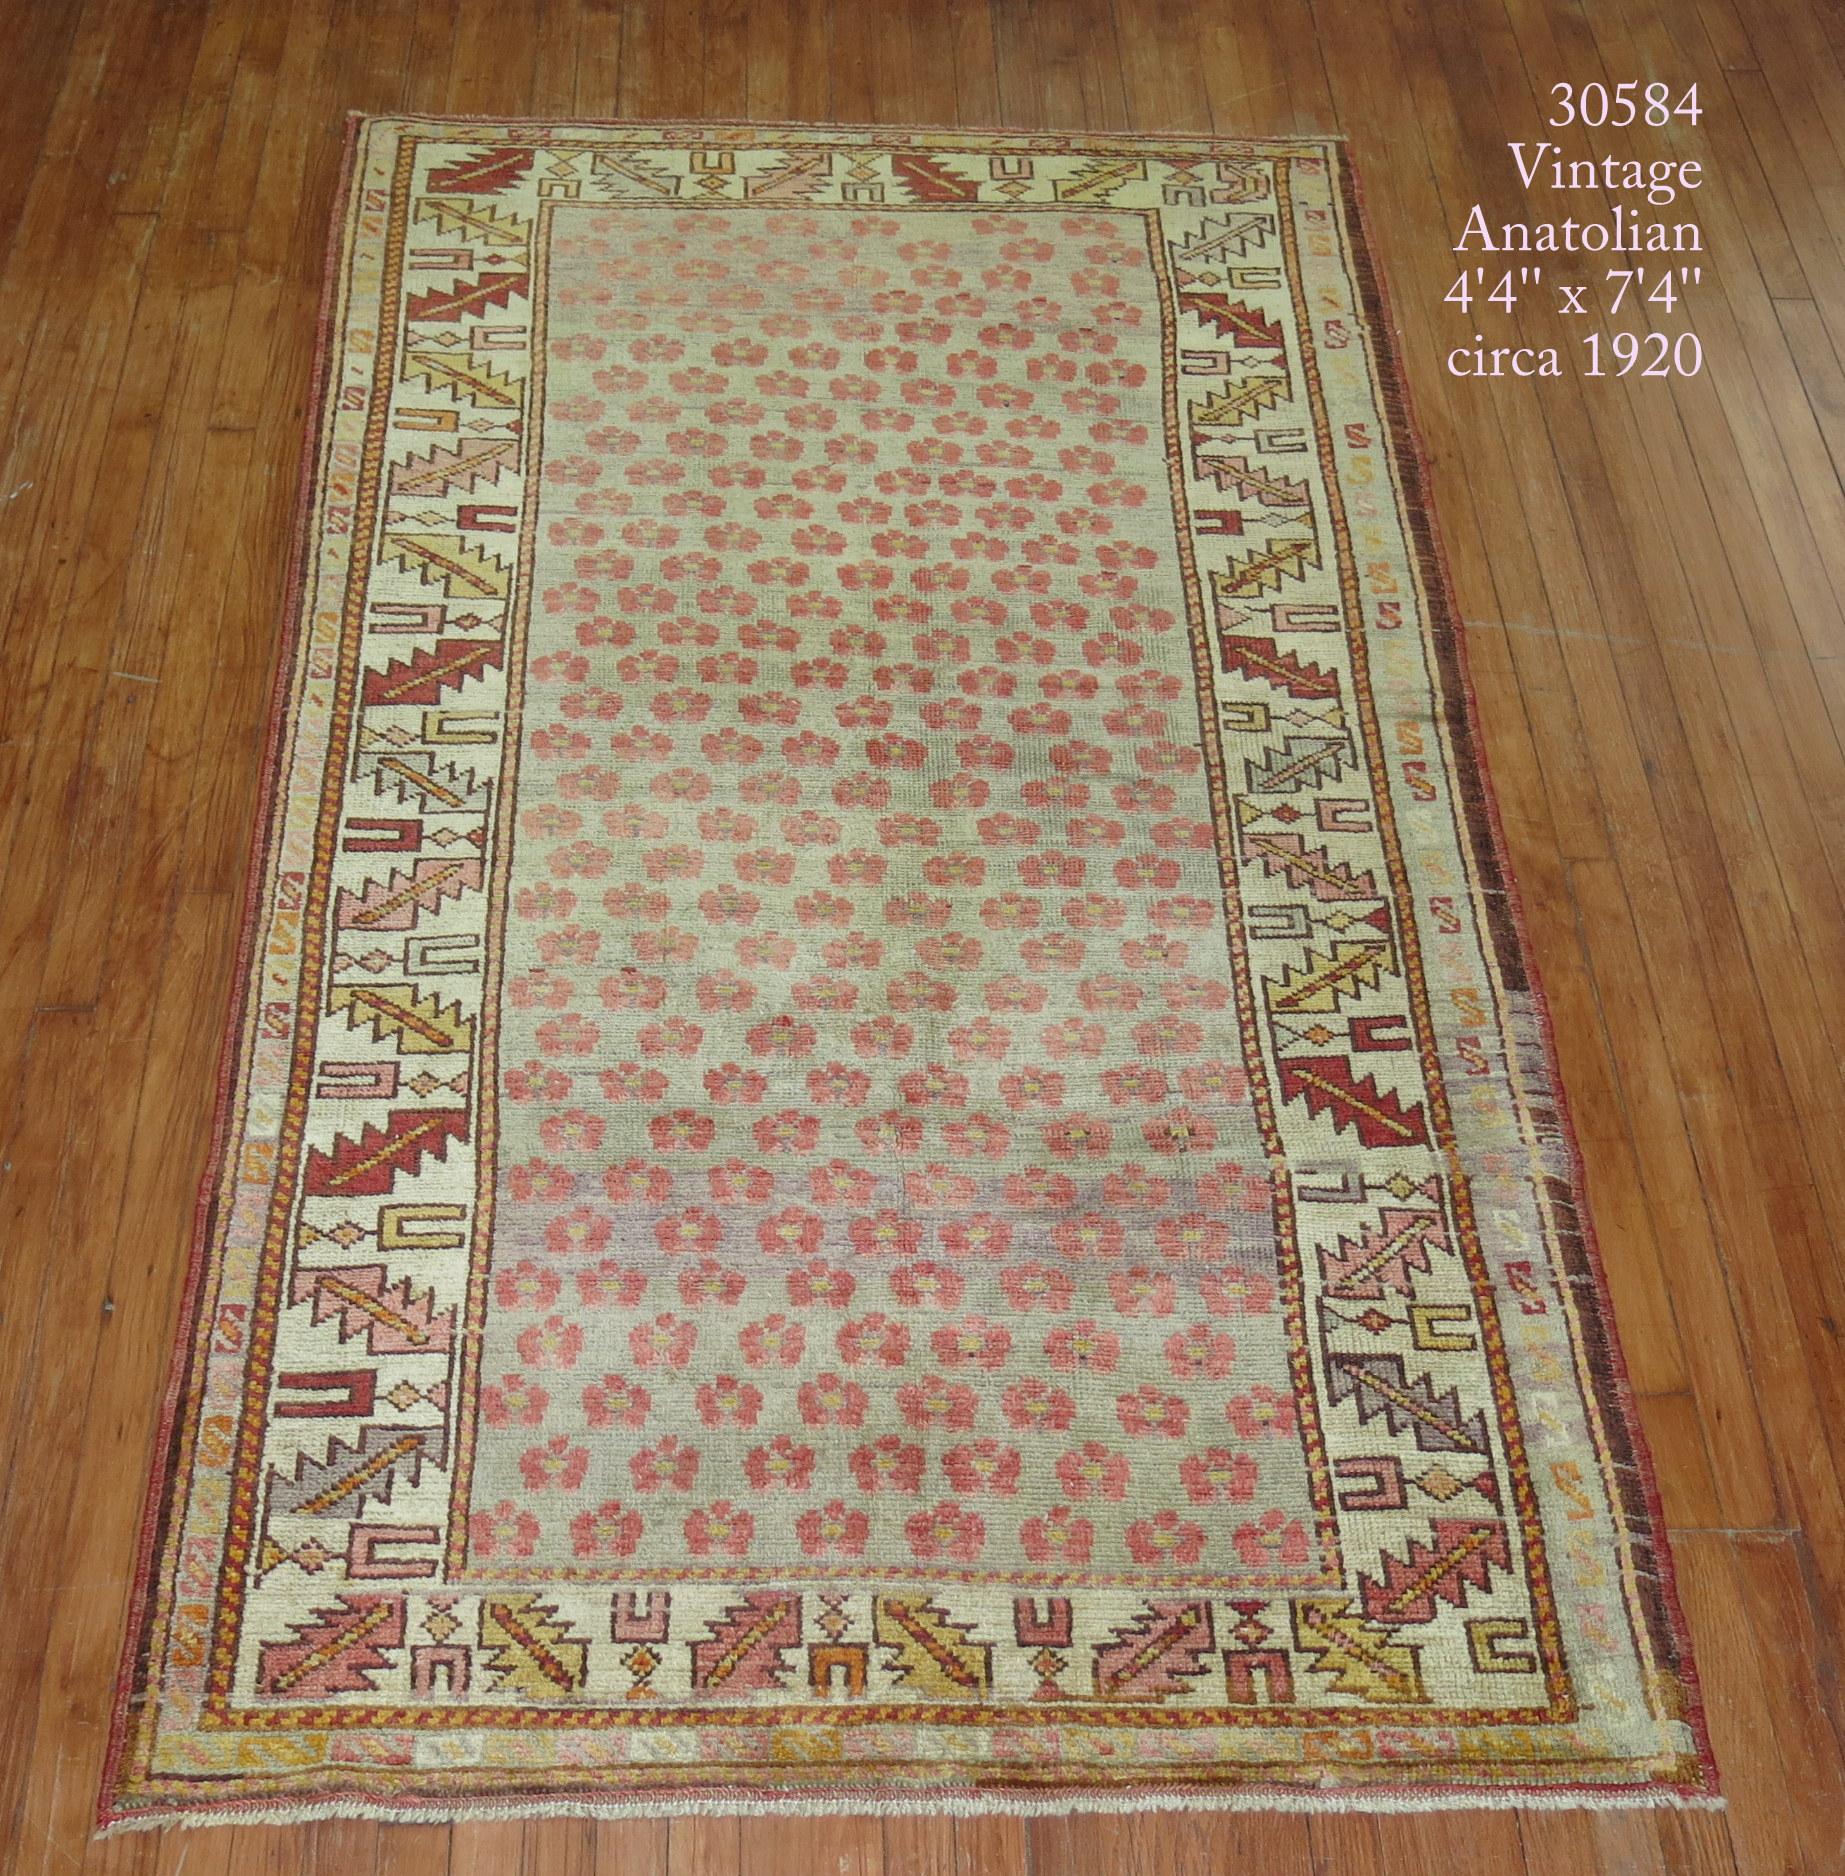 One of a kind decorative vintage Turkish Anatolian rug with a small repetitive floral design on a gray color ground.

Measures: 4'4